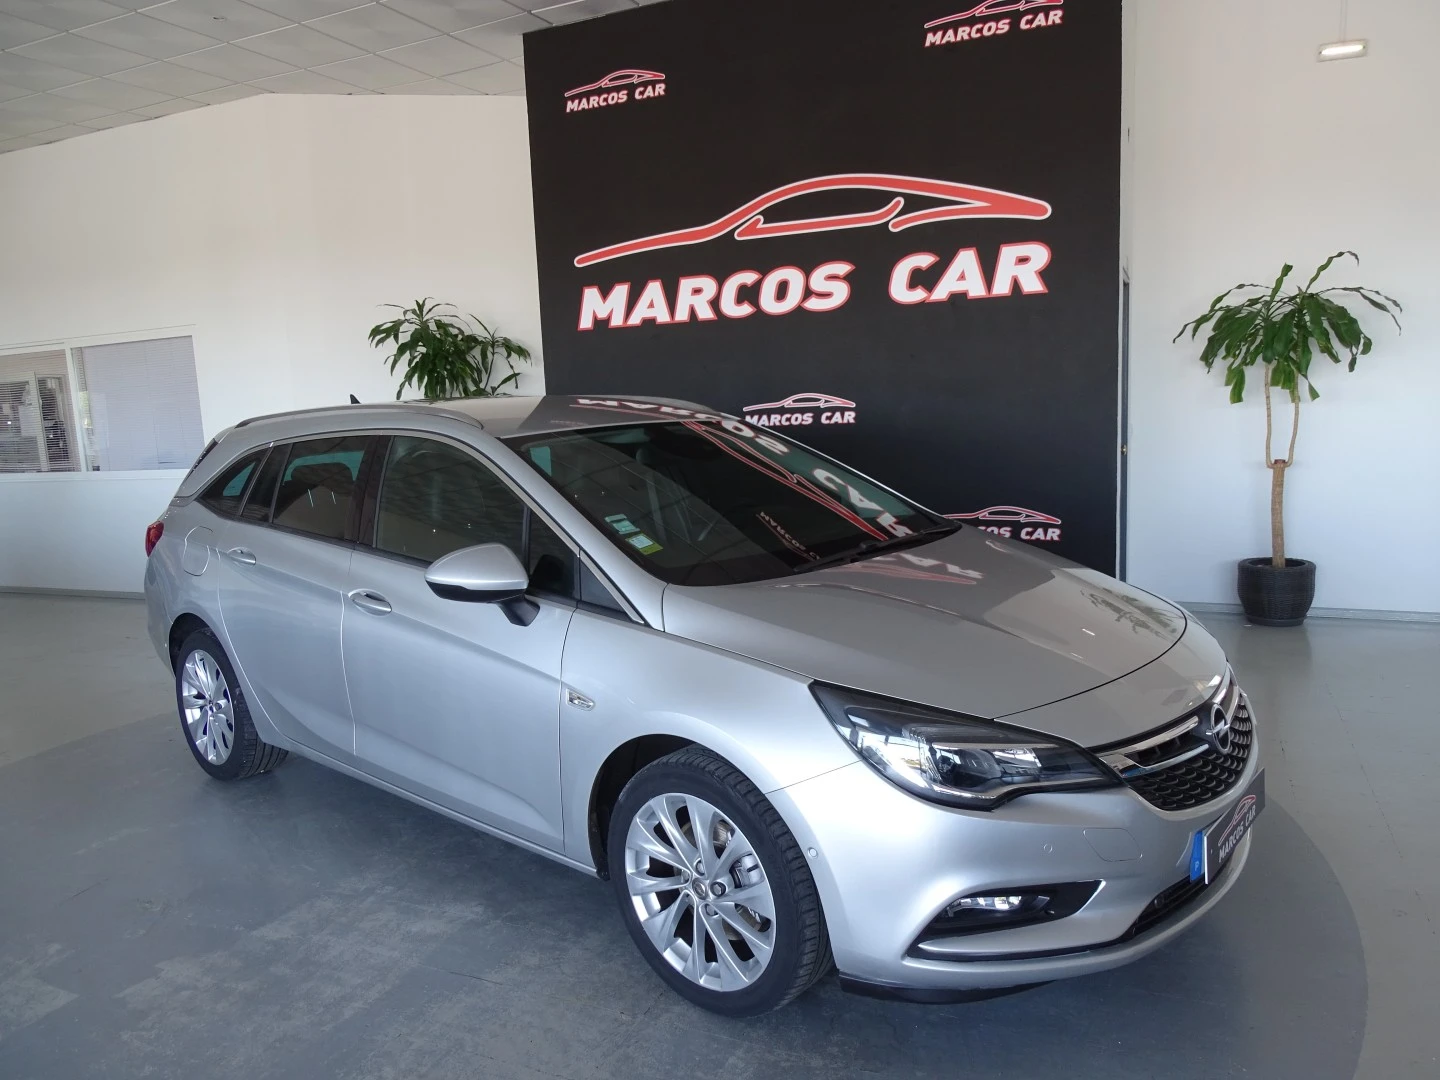 Opel Astra Sports Tourer 1.6 CDTI Business Edition S/S